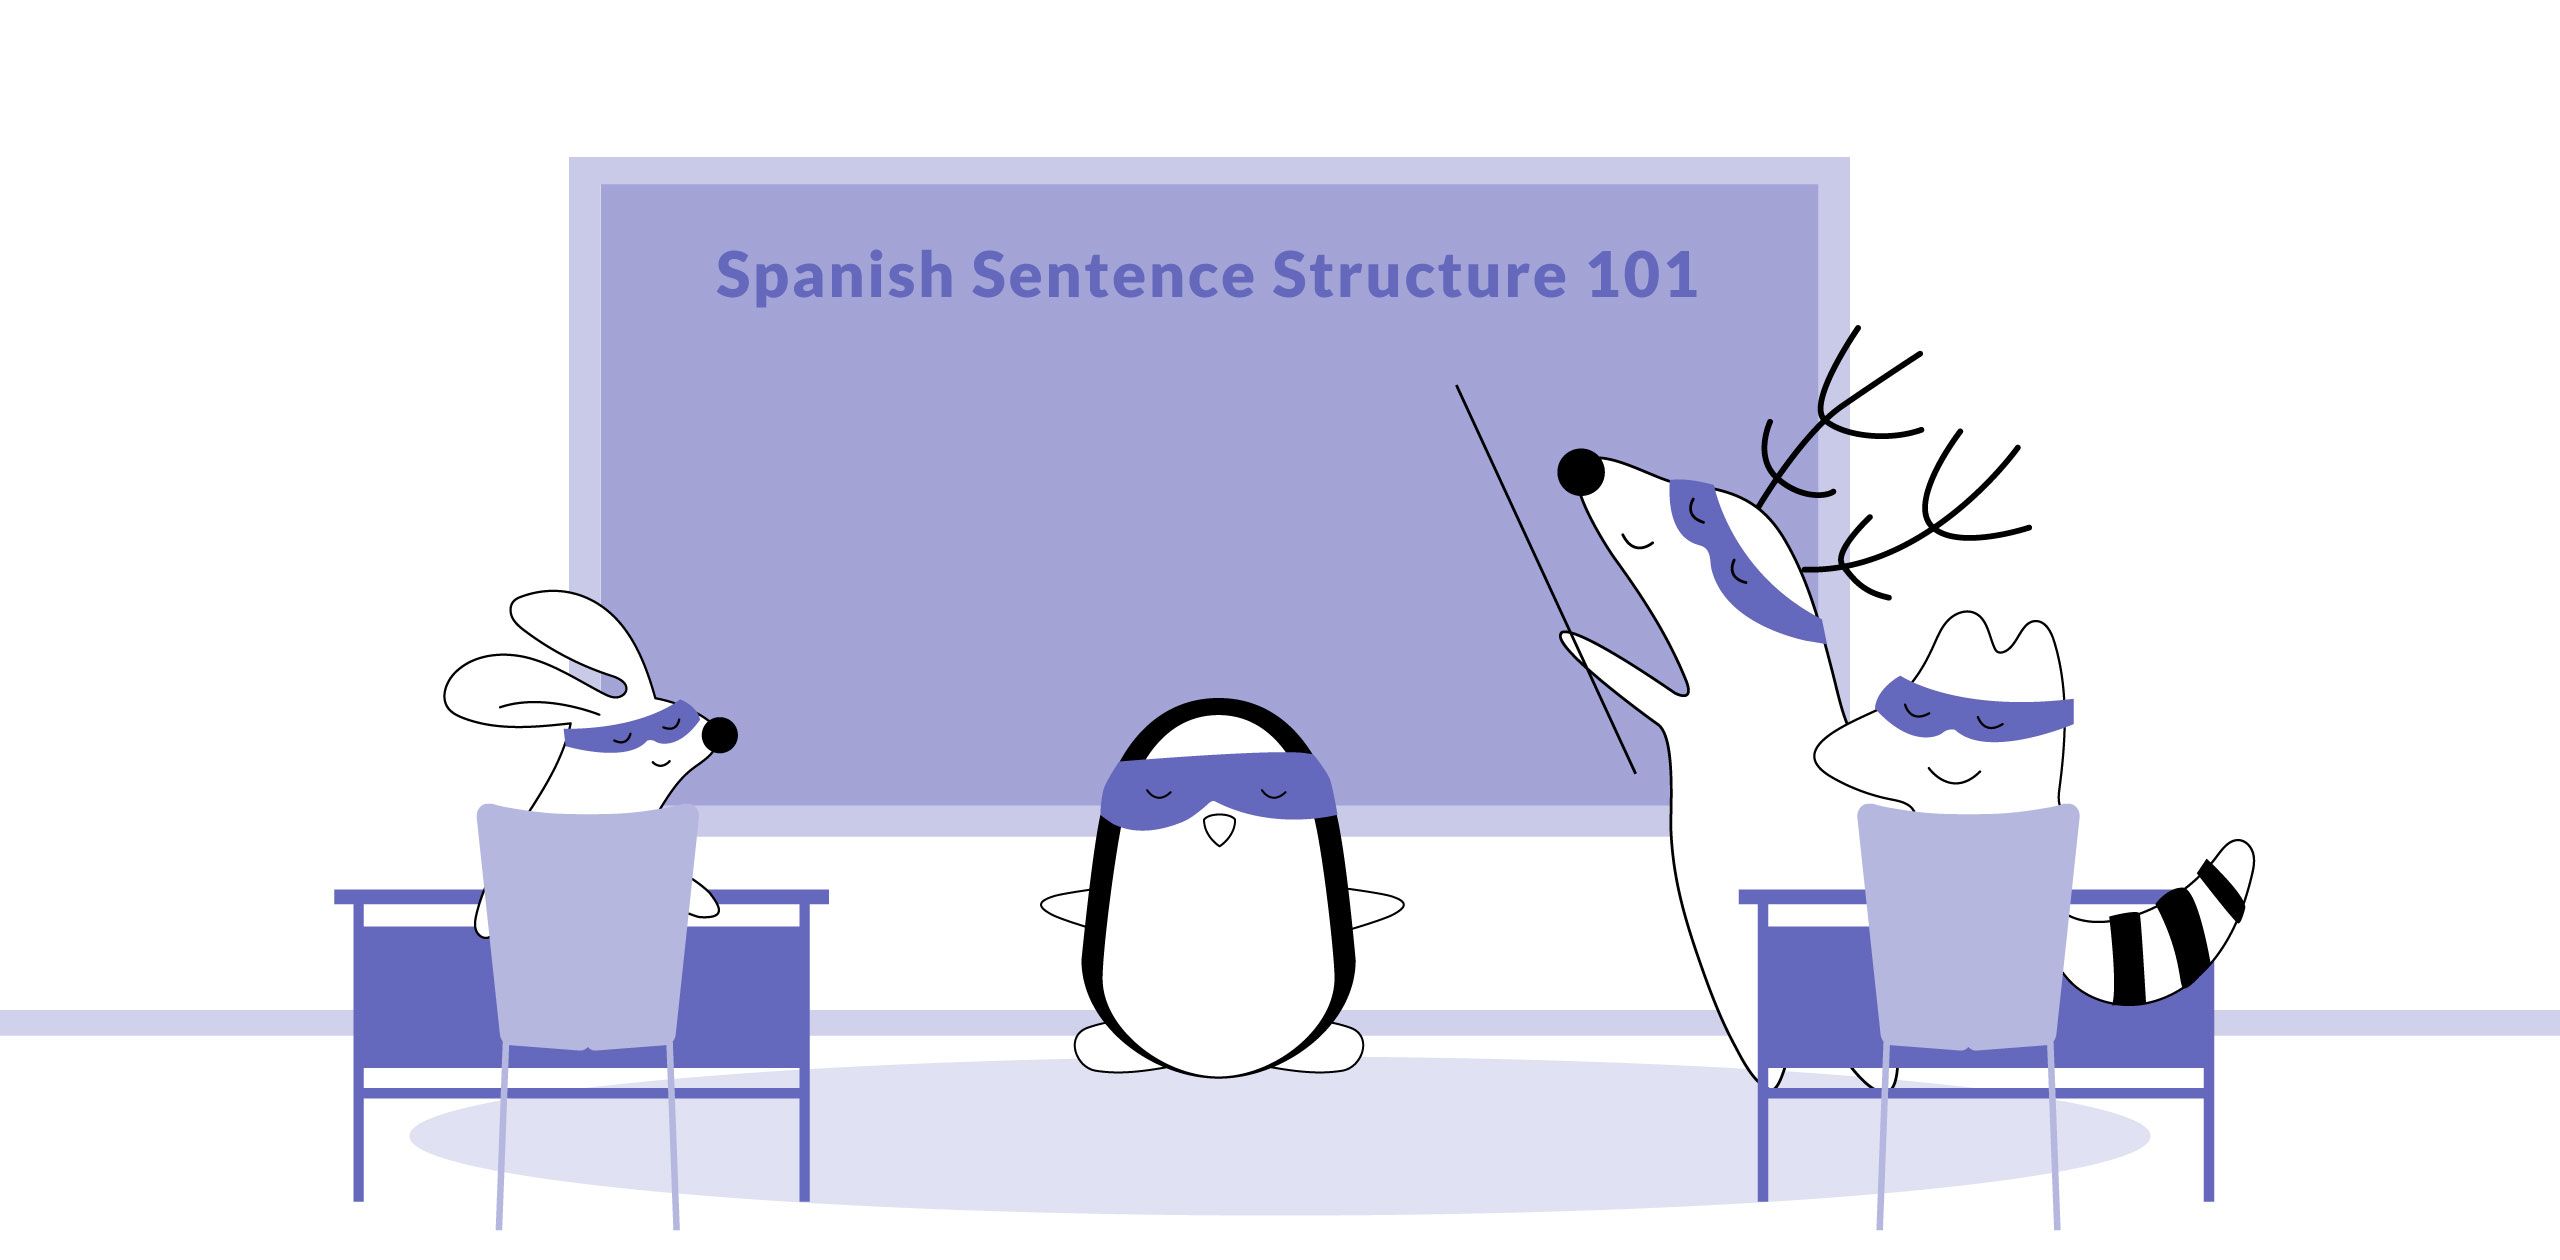 Learn the sentence structure in Spanish